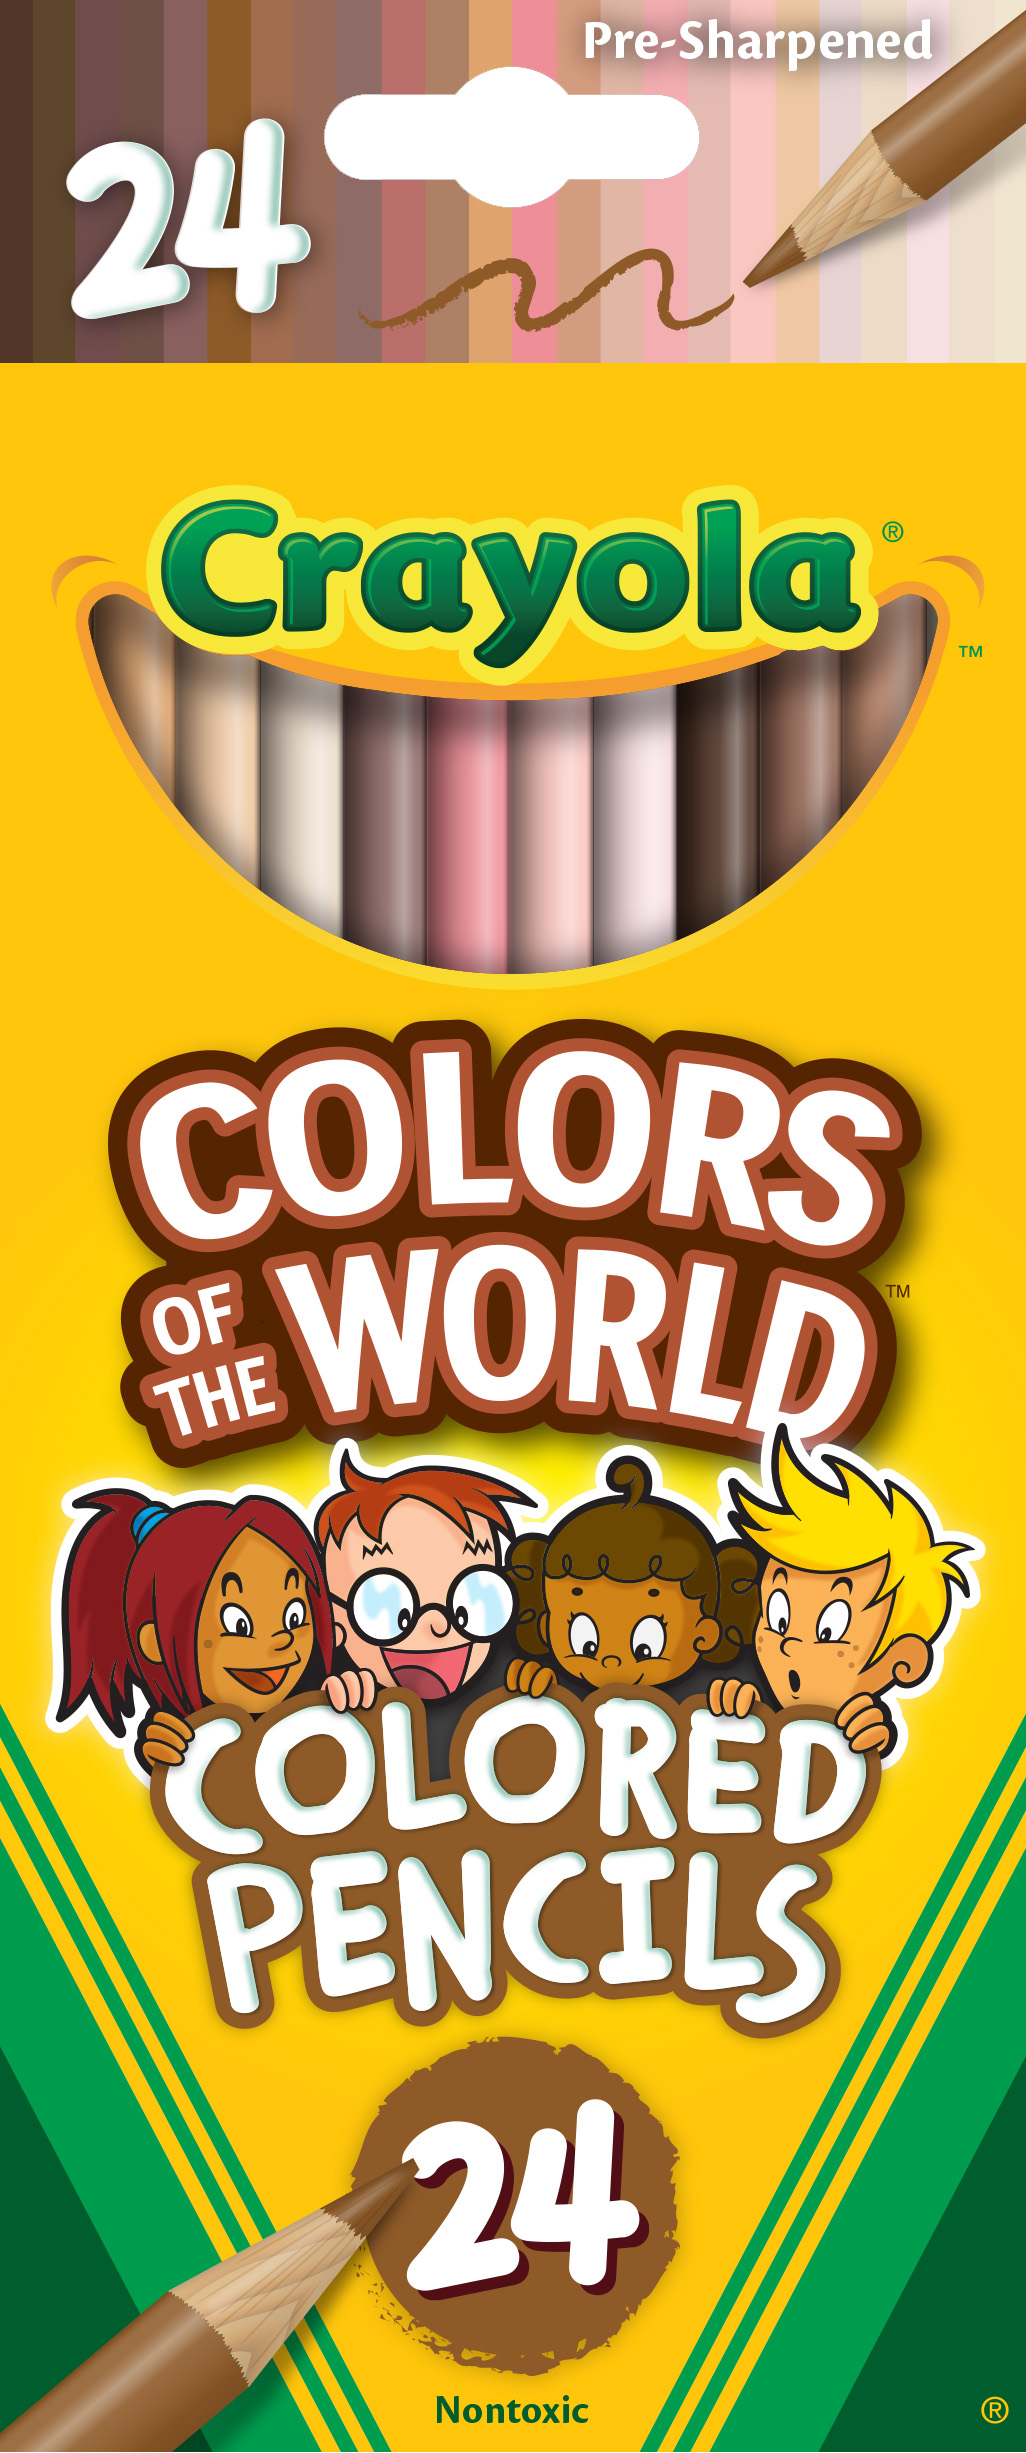 Crayola Colored Pencils 24 Pack, Colors of the World, Skin Tone Colored Pencils, 24 Colors, Child - image 1 of 8